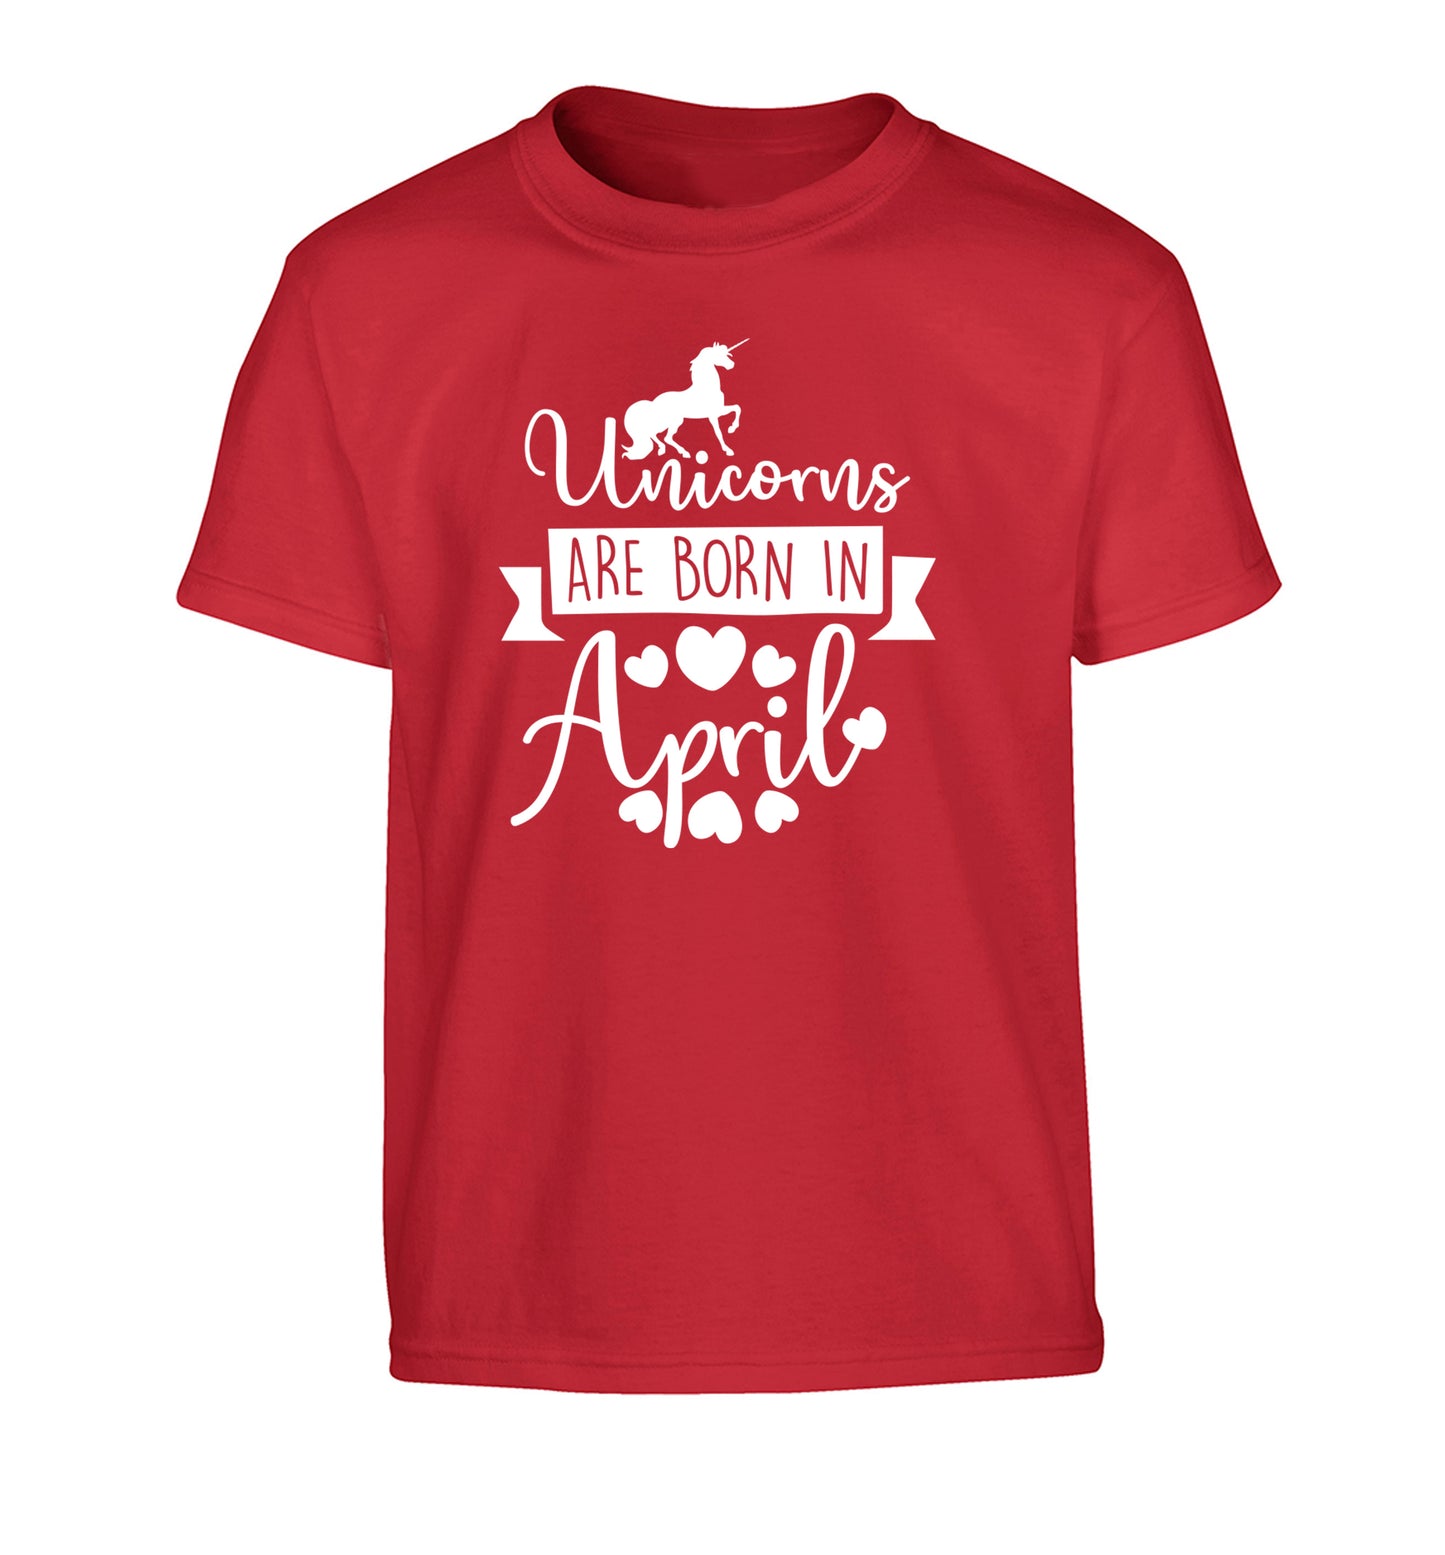 Unicorns are born in April Children's red Tshirt 12-13 Years